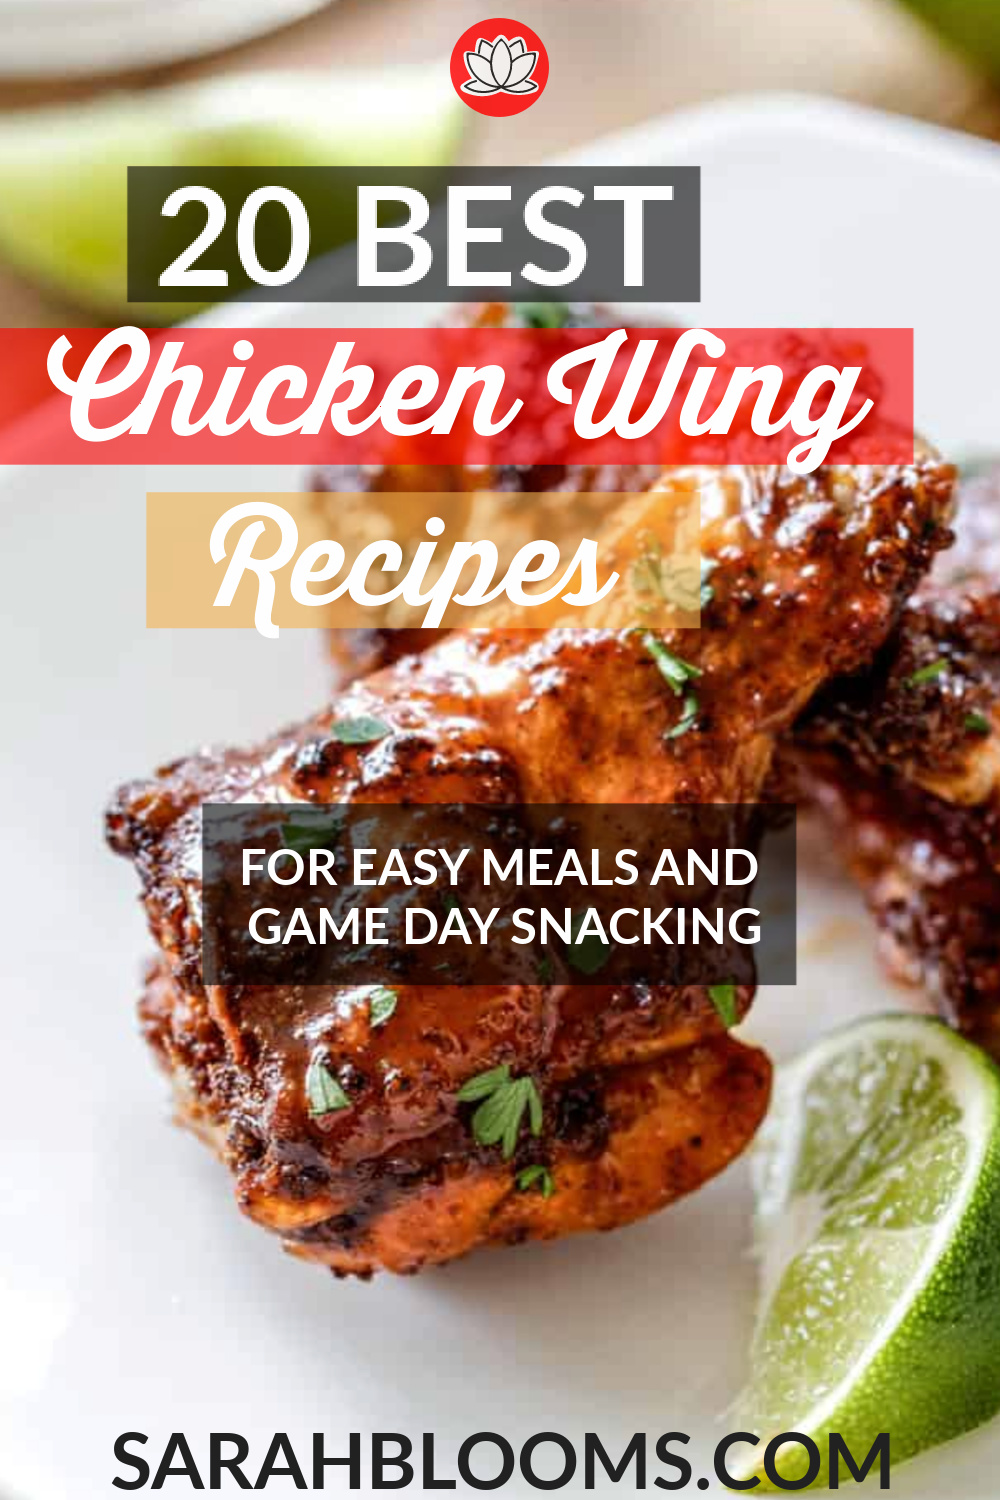 Make these Ultimate Chicken Wing Recipes for your next Game Day celebration or cozy night in! #gameday #snackrecipes #chickenwings #chickenwingrecipes #partyrecipes